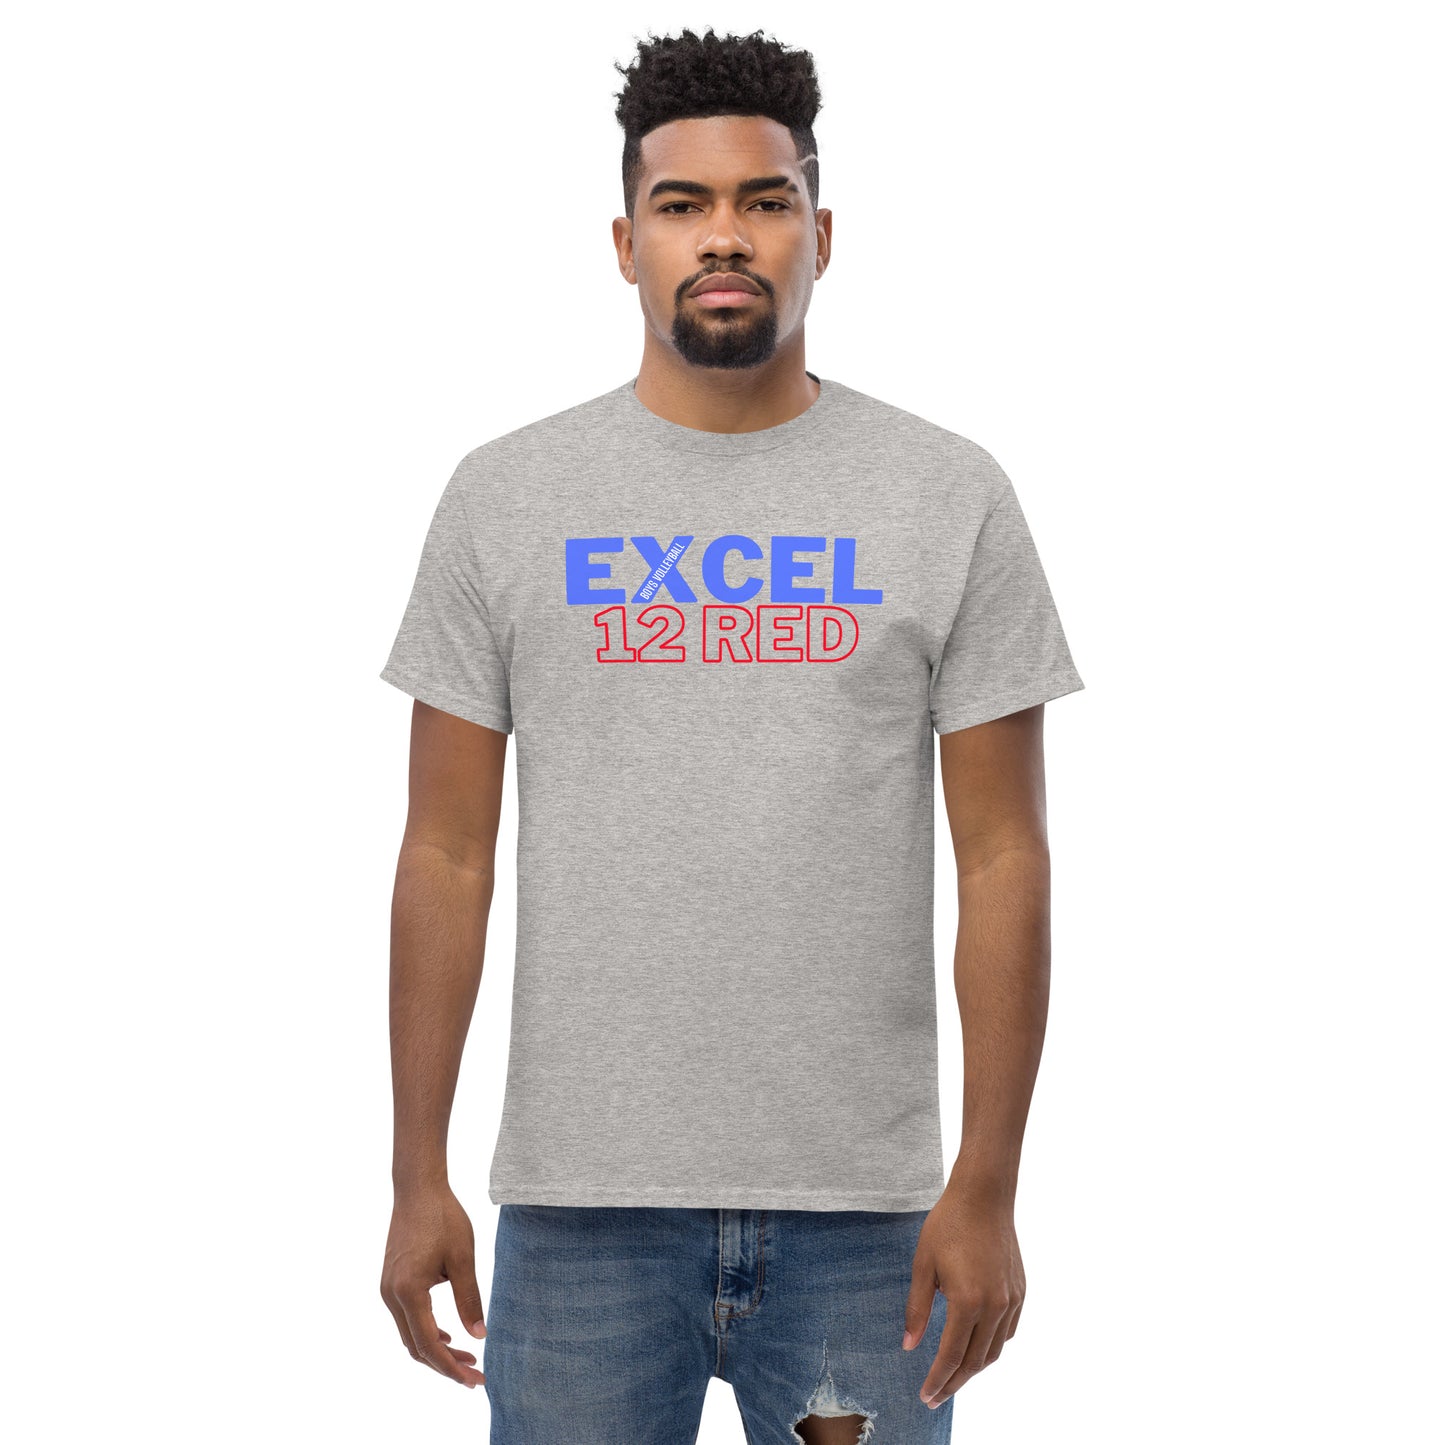 Excel - Boys Volleyball - 12 Red - Men's classic tee